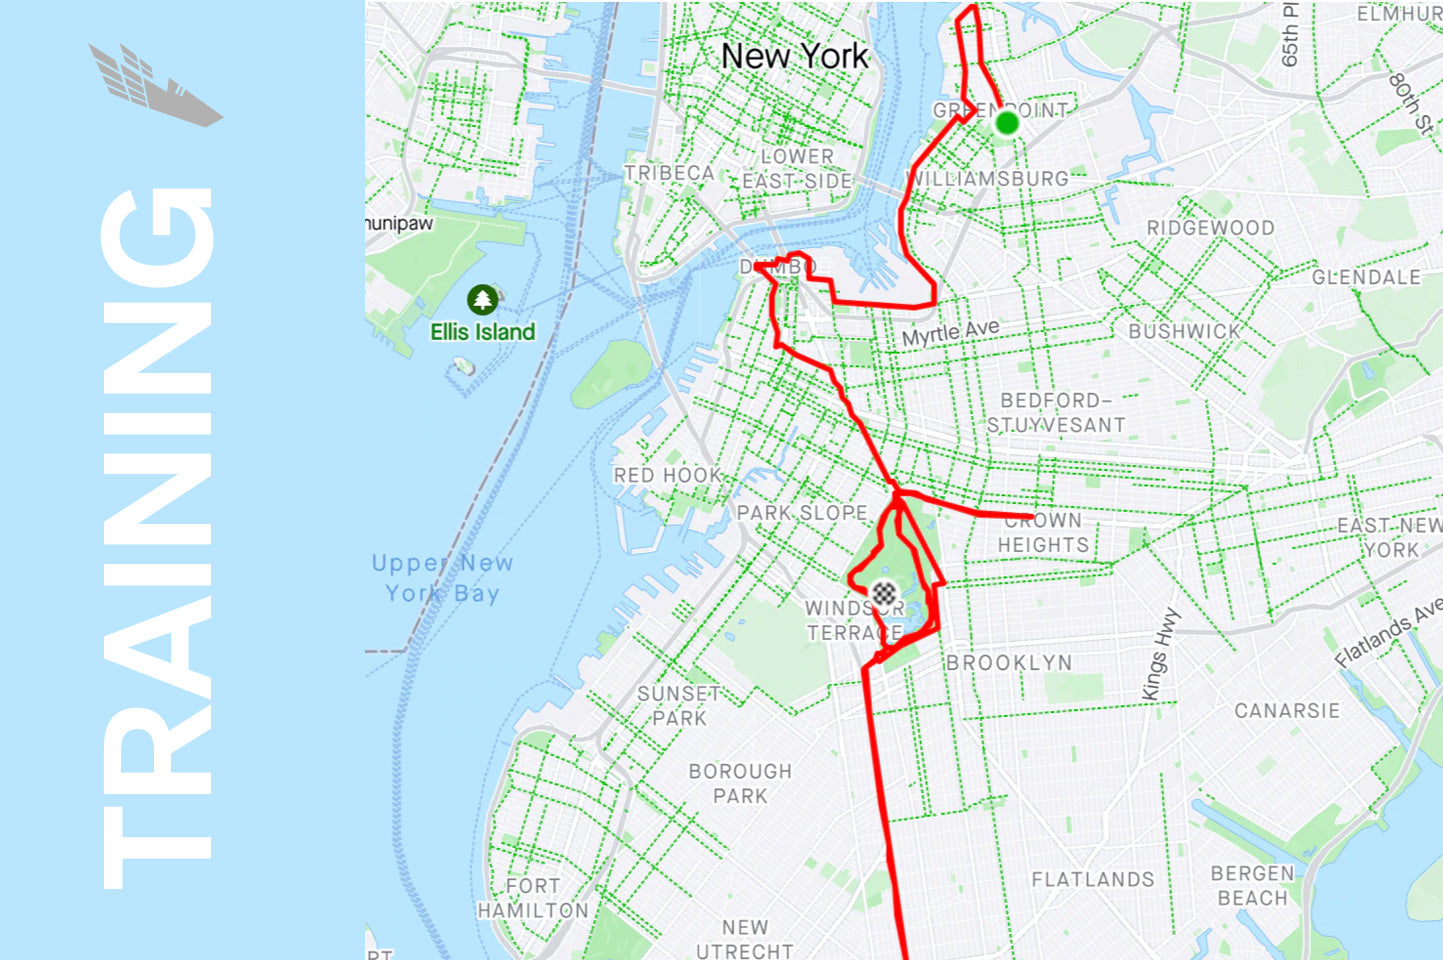 Brooklyn Marathon (and Half Marathon) Course Overview and Strategy